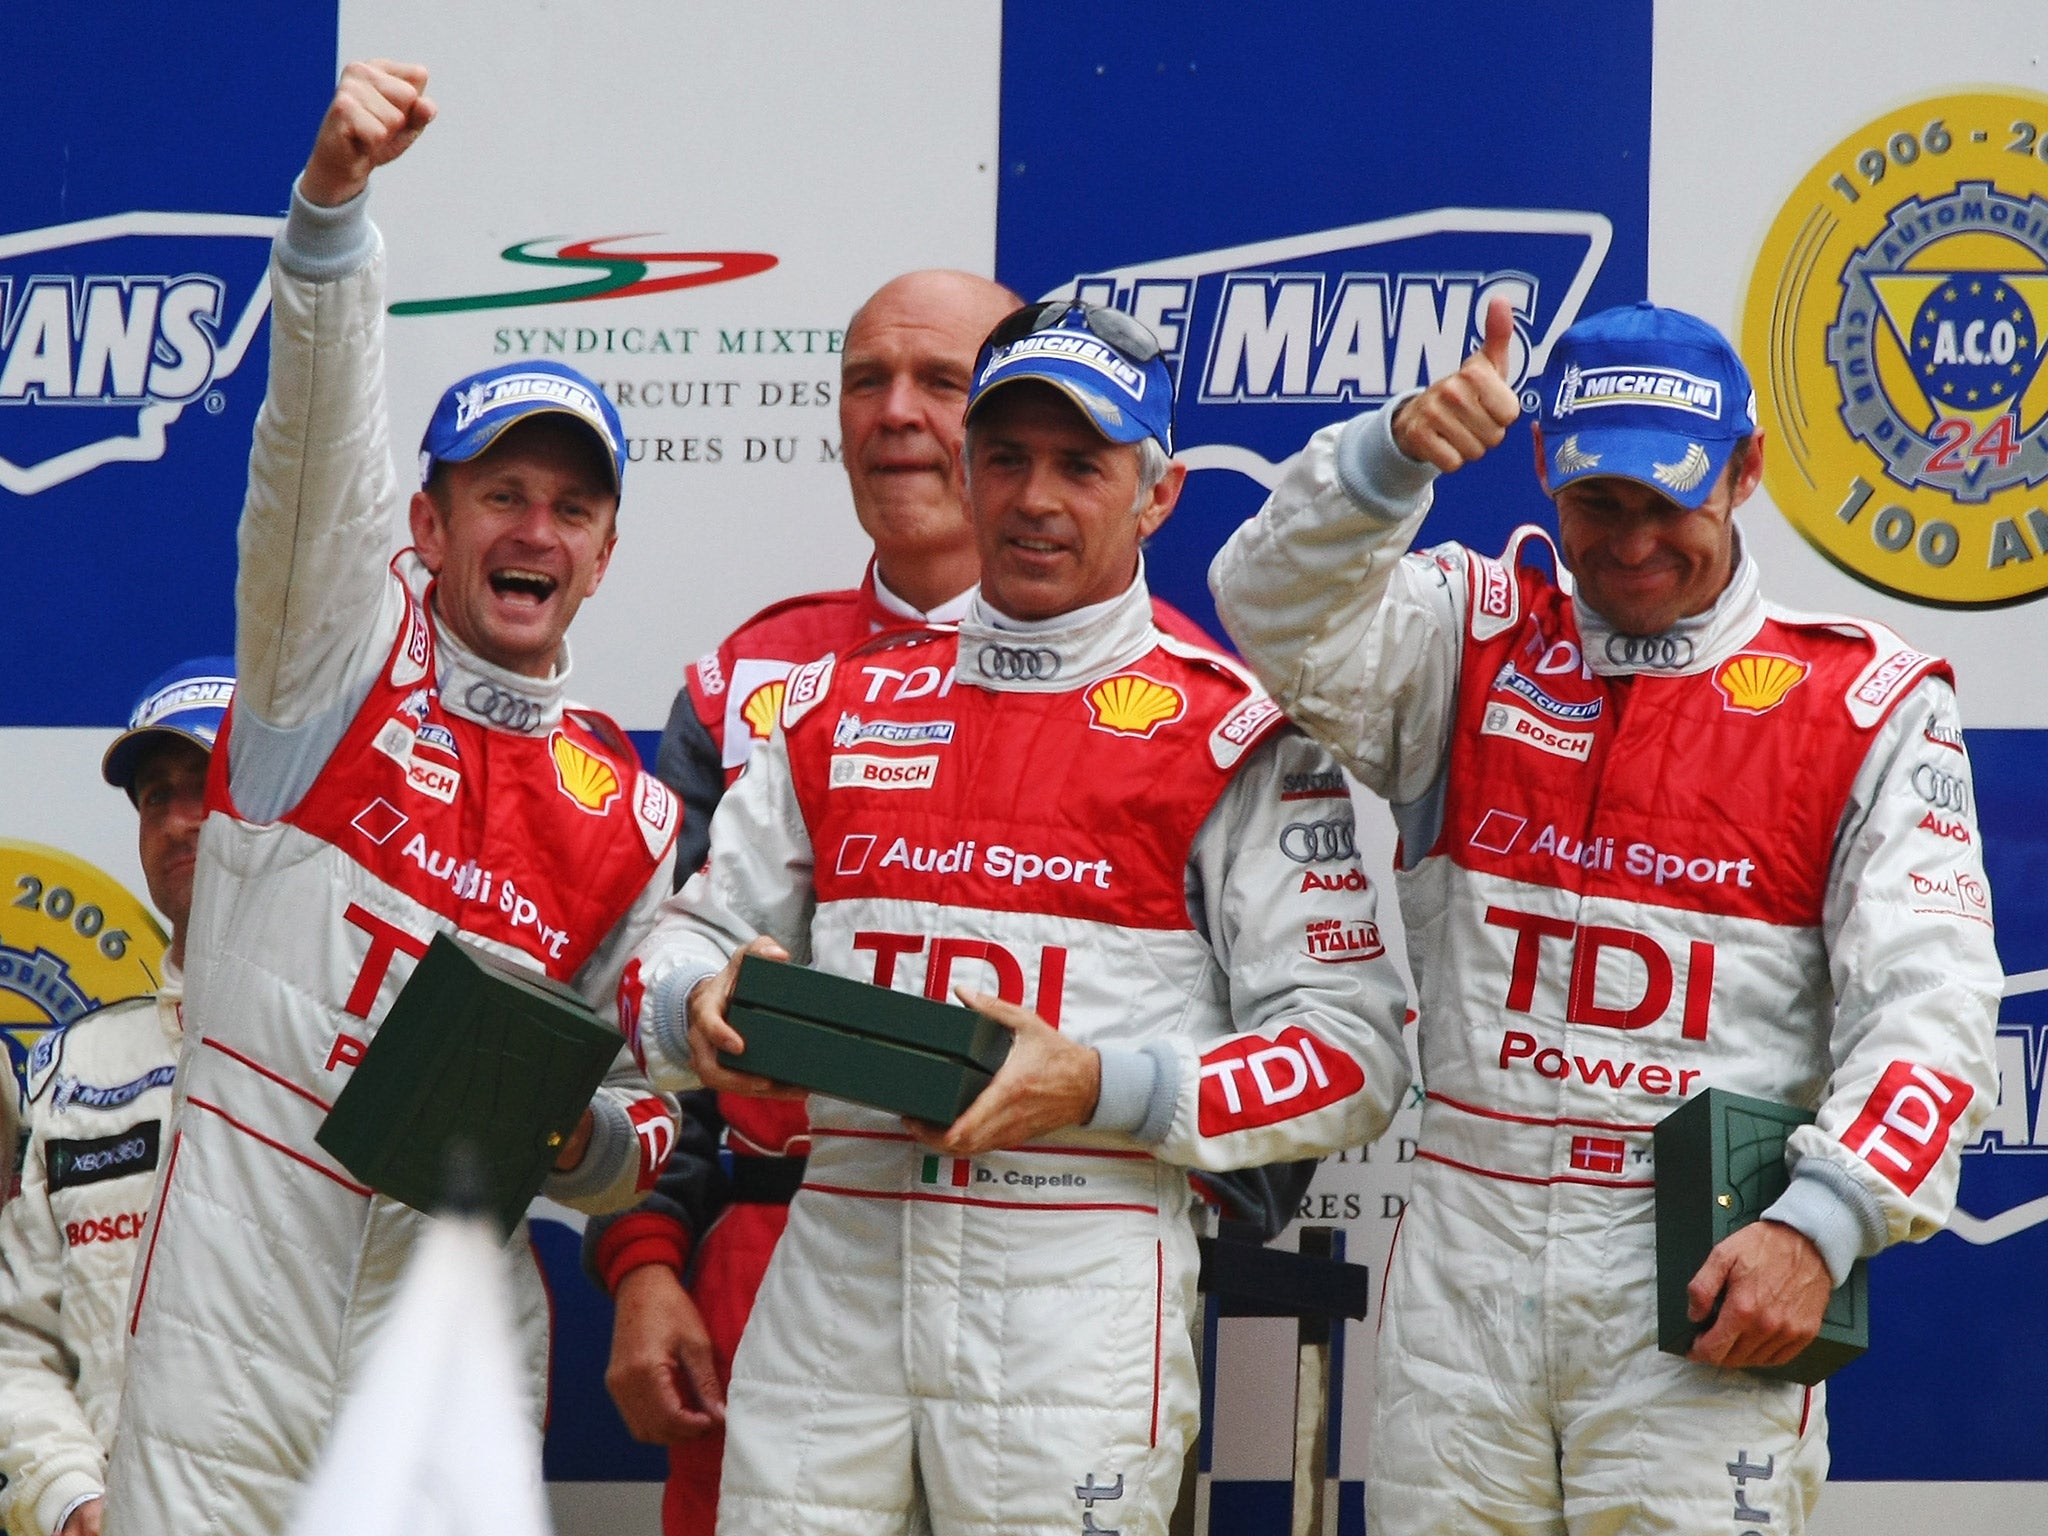 McNish has won Le Mans three-times during his career